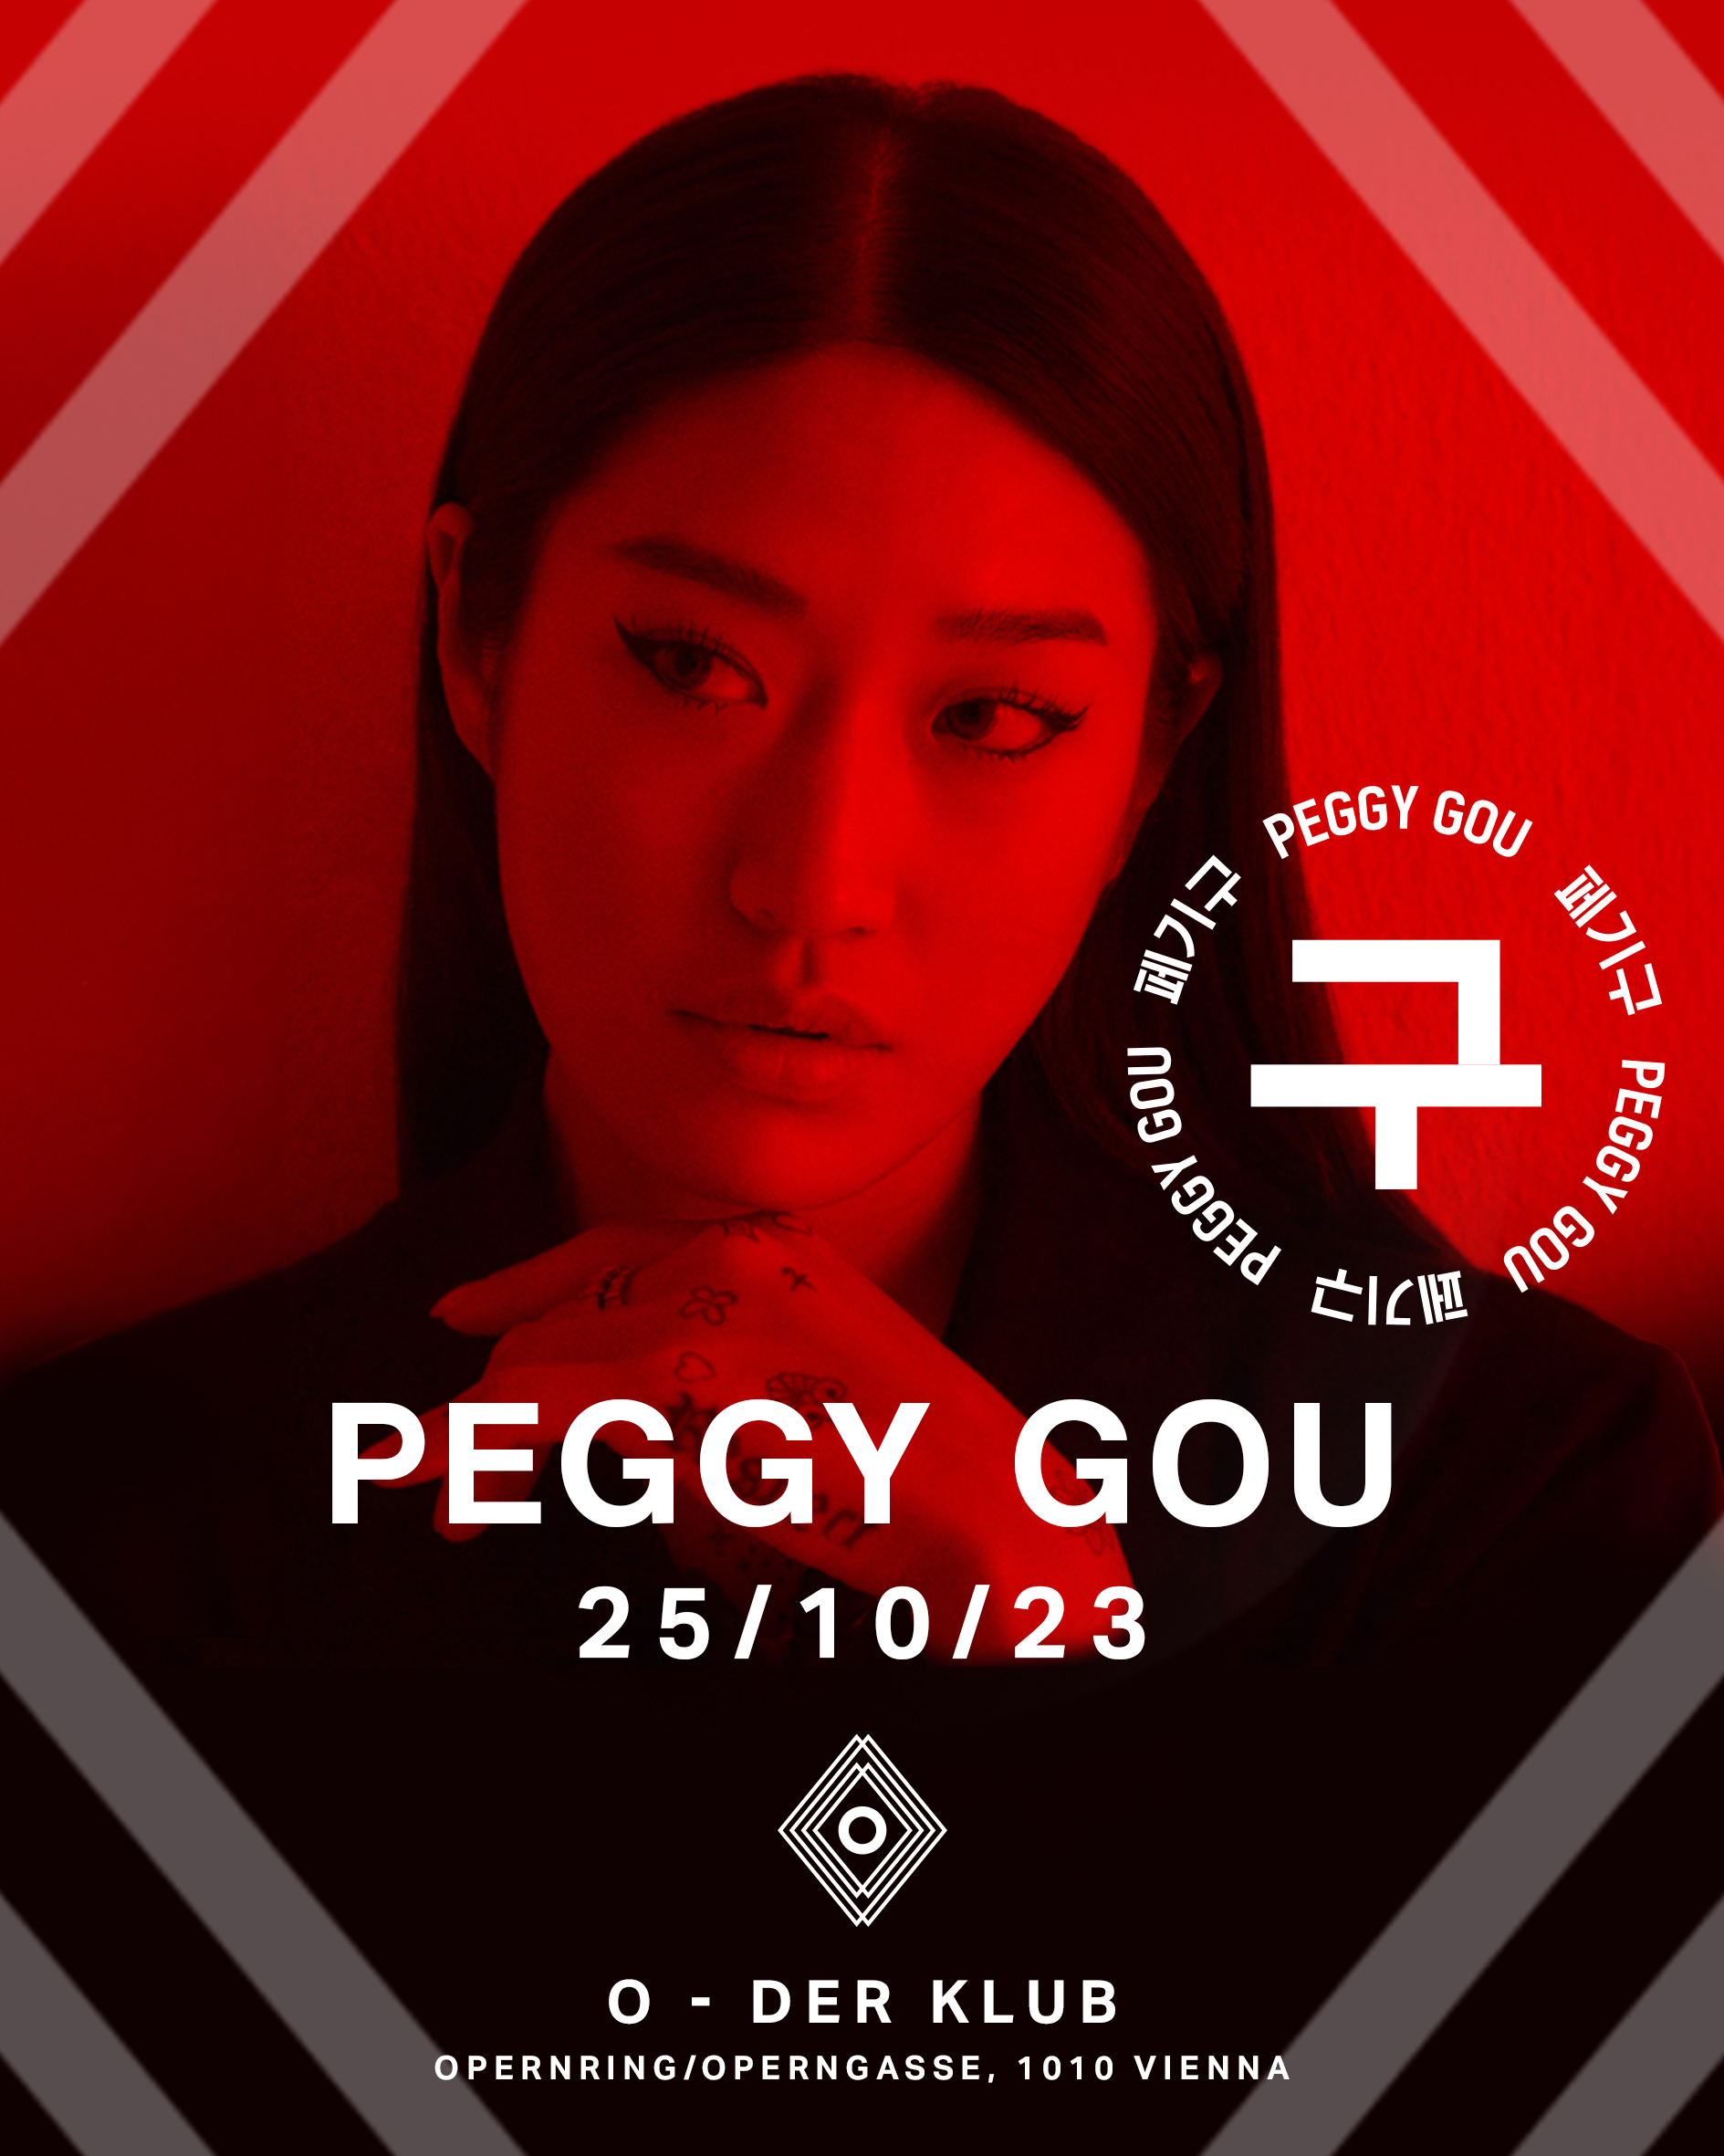 Peggy Gou music, videos, stats, and photos